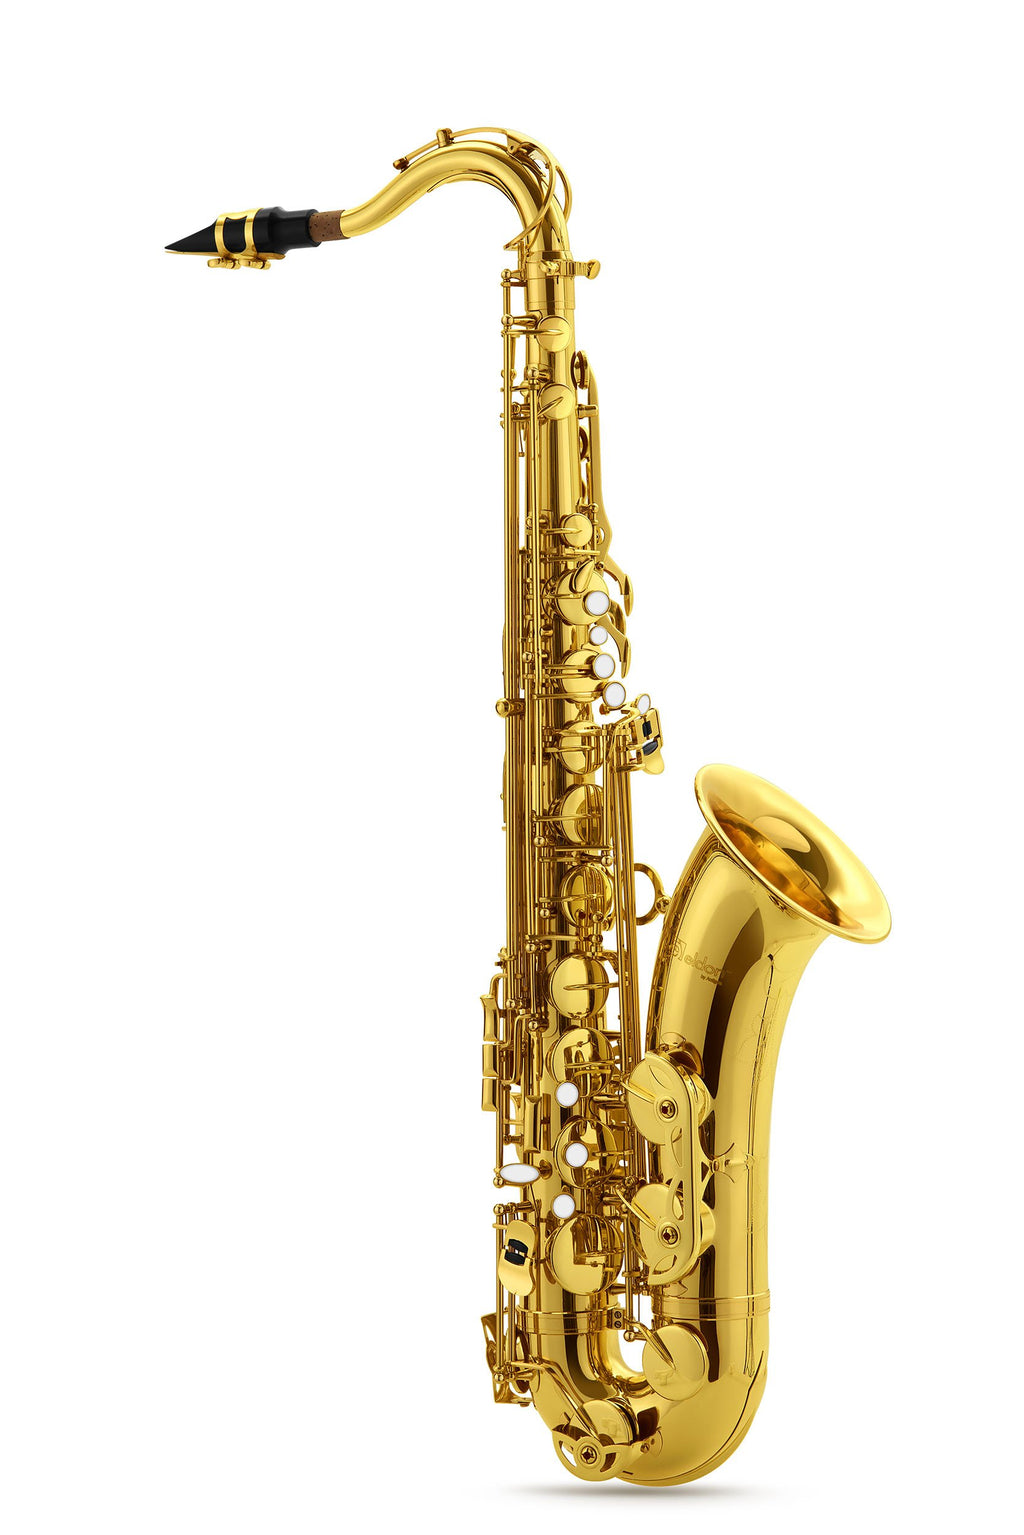 Eldon By Antigua TS-22 Bb Tenor Saxophone with Lacquer Finish